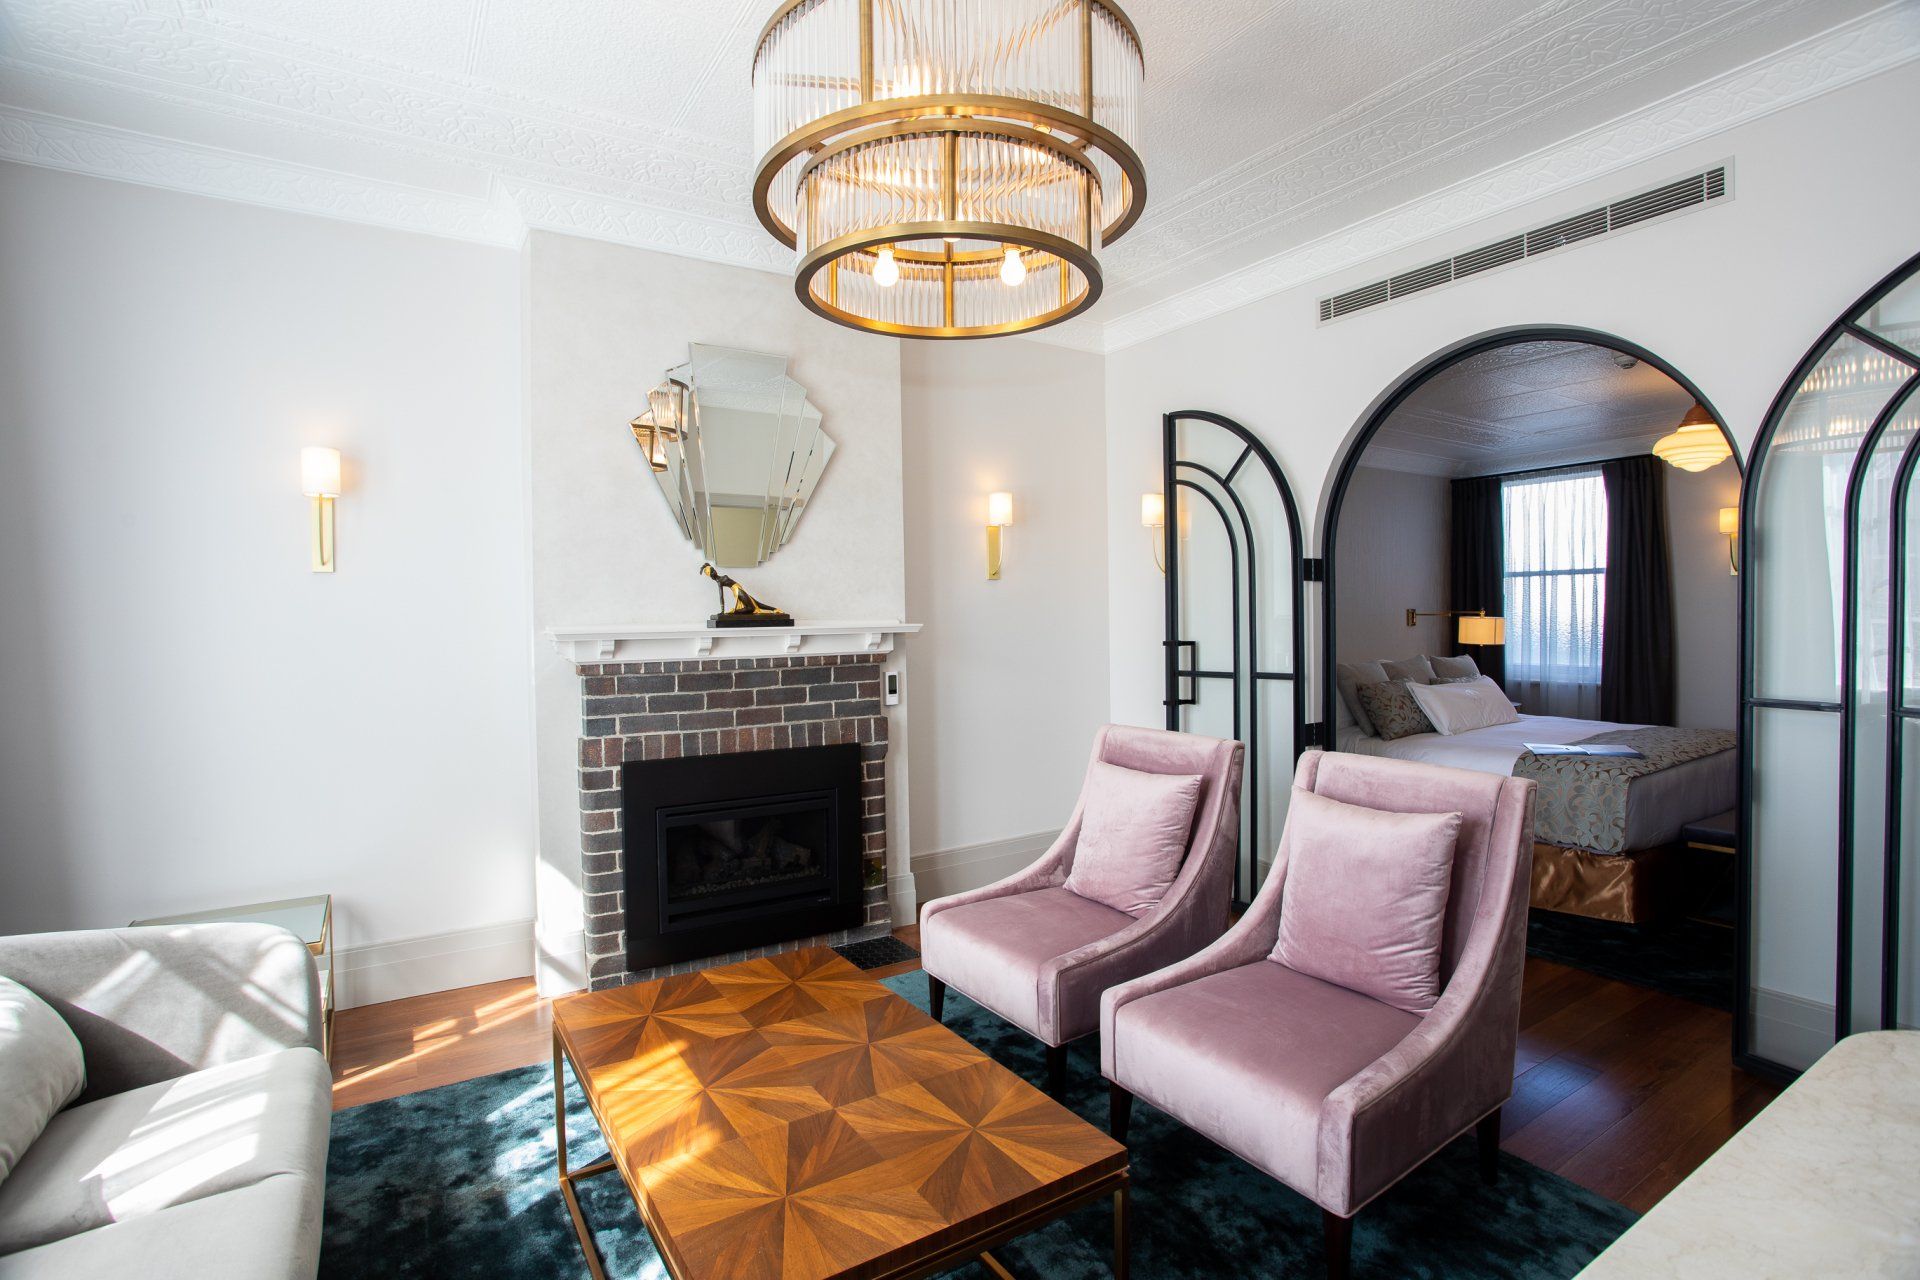 a room at tattersalls hotel with a fireplace, chairs, a couch and a chandelier.